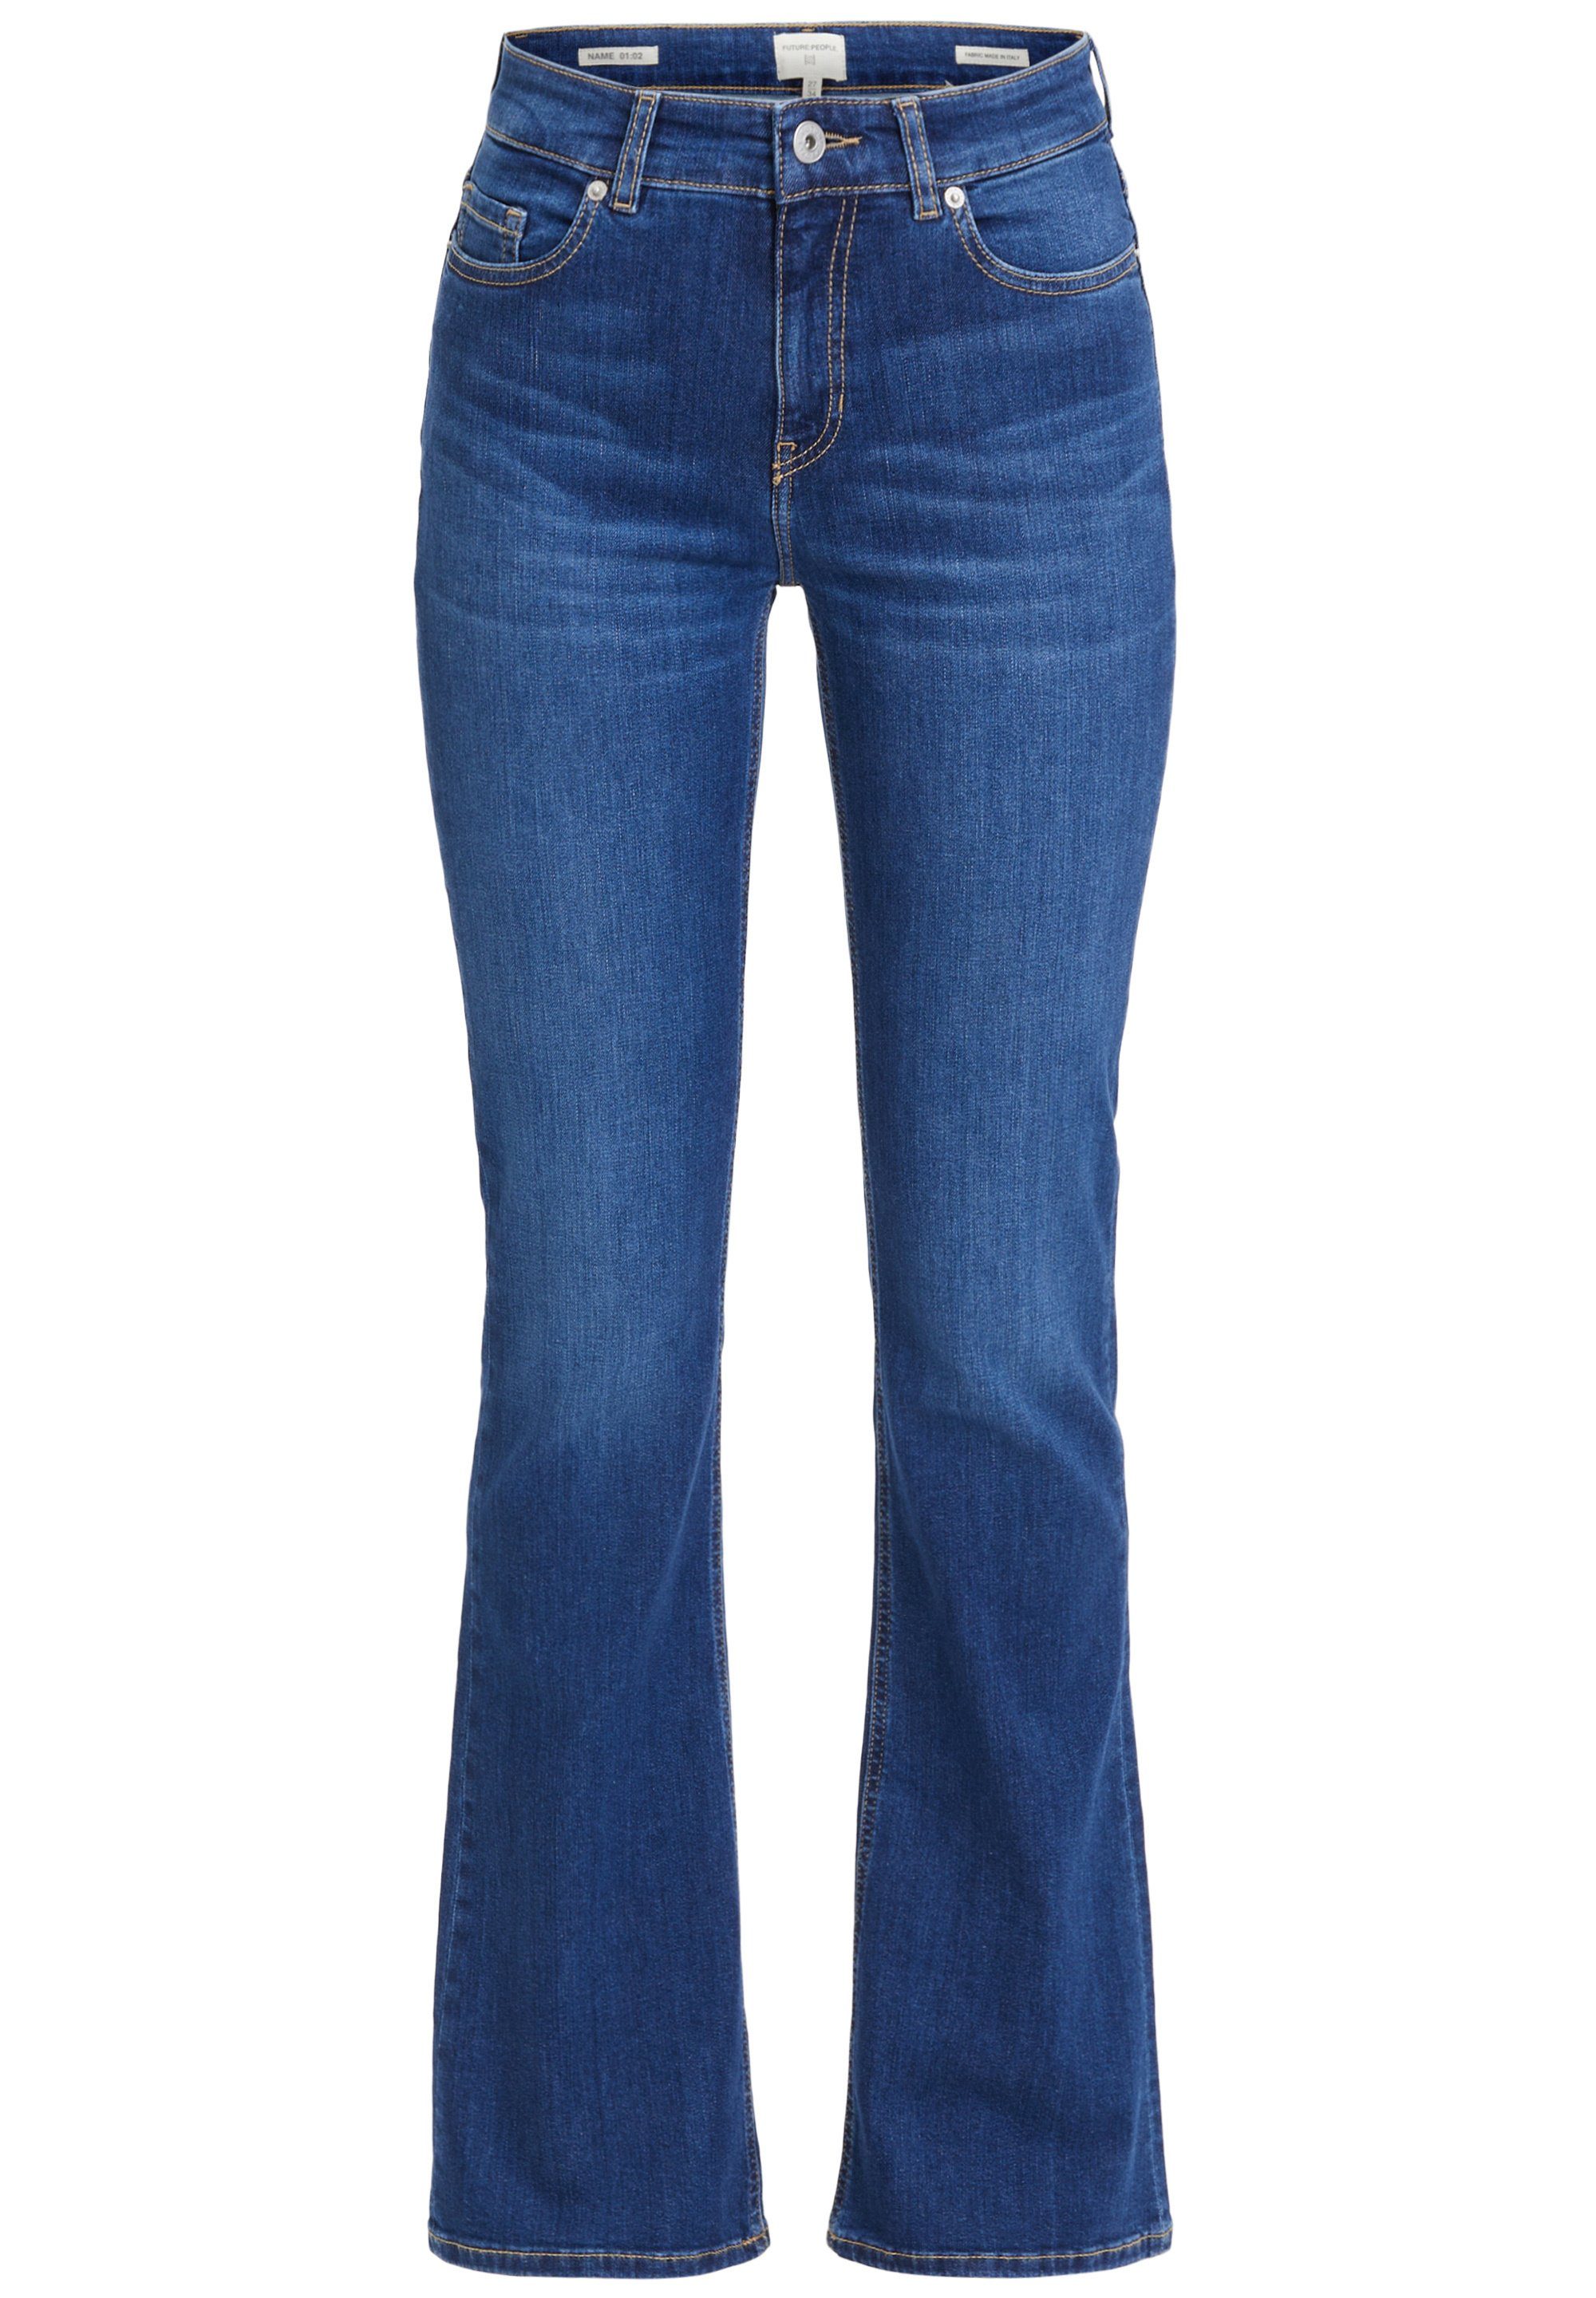 AUTHENTIC USED Future. Care BOOTCUT 01:02 - #WeC4F We Slim-fit-Jeans FUTURE:PEOPLE. BLUE for - MID WAIST